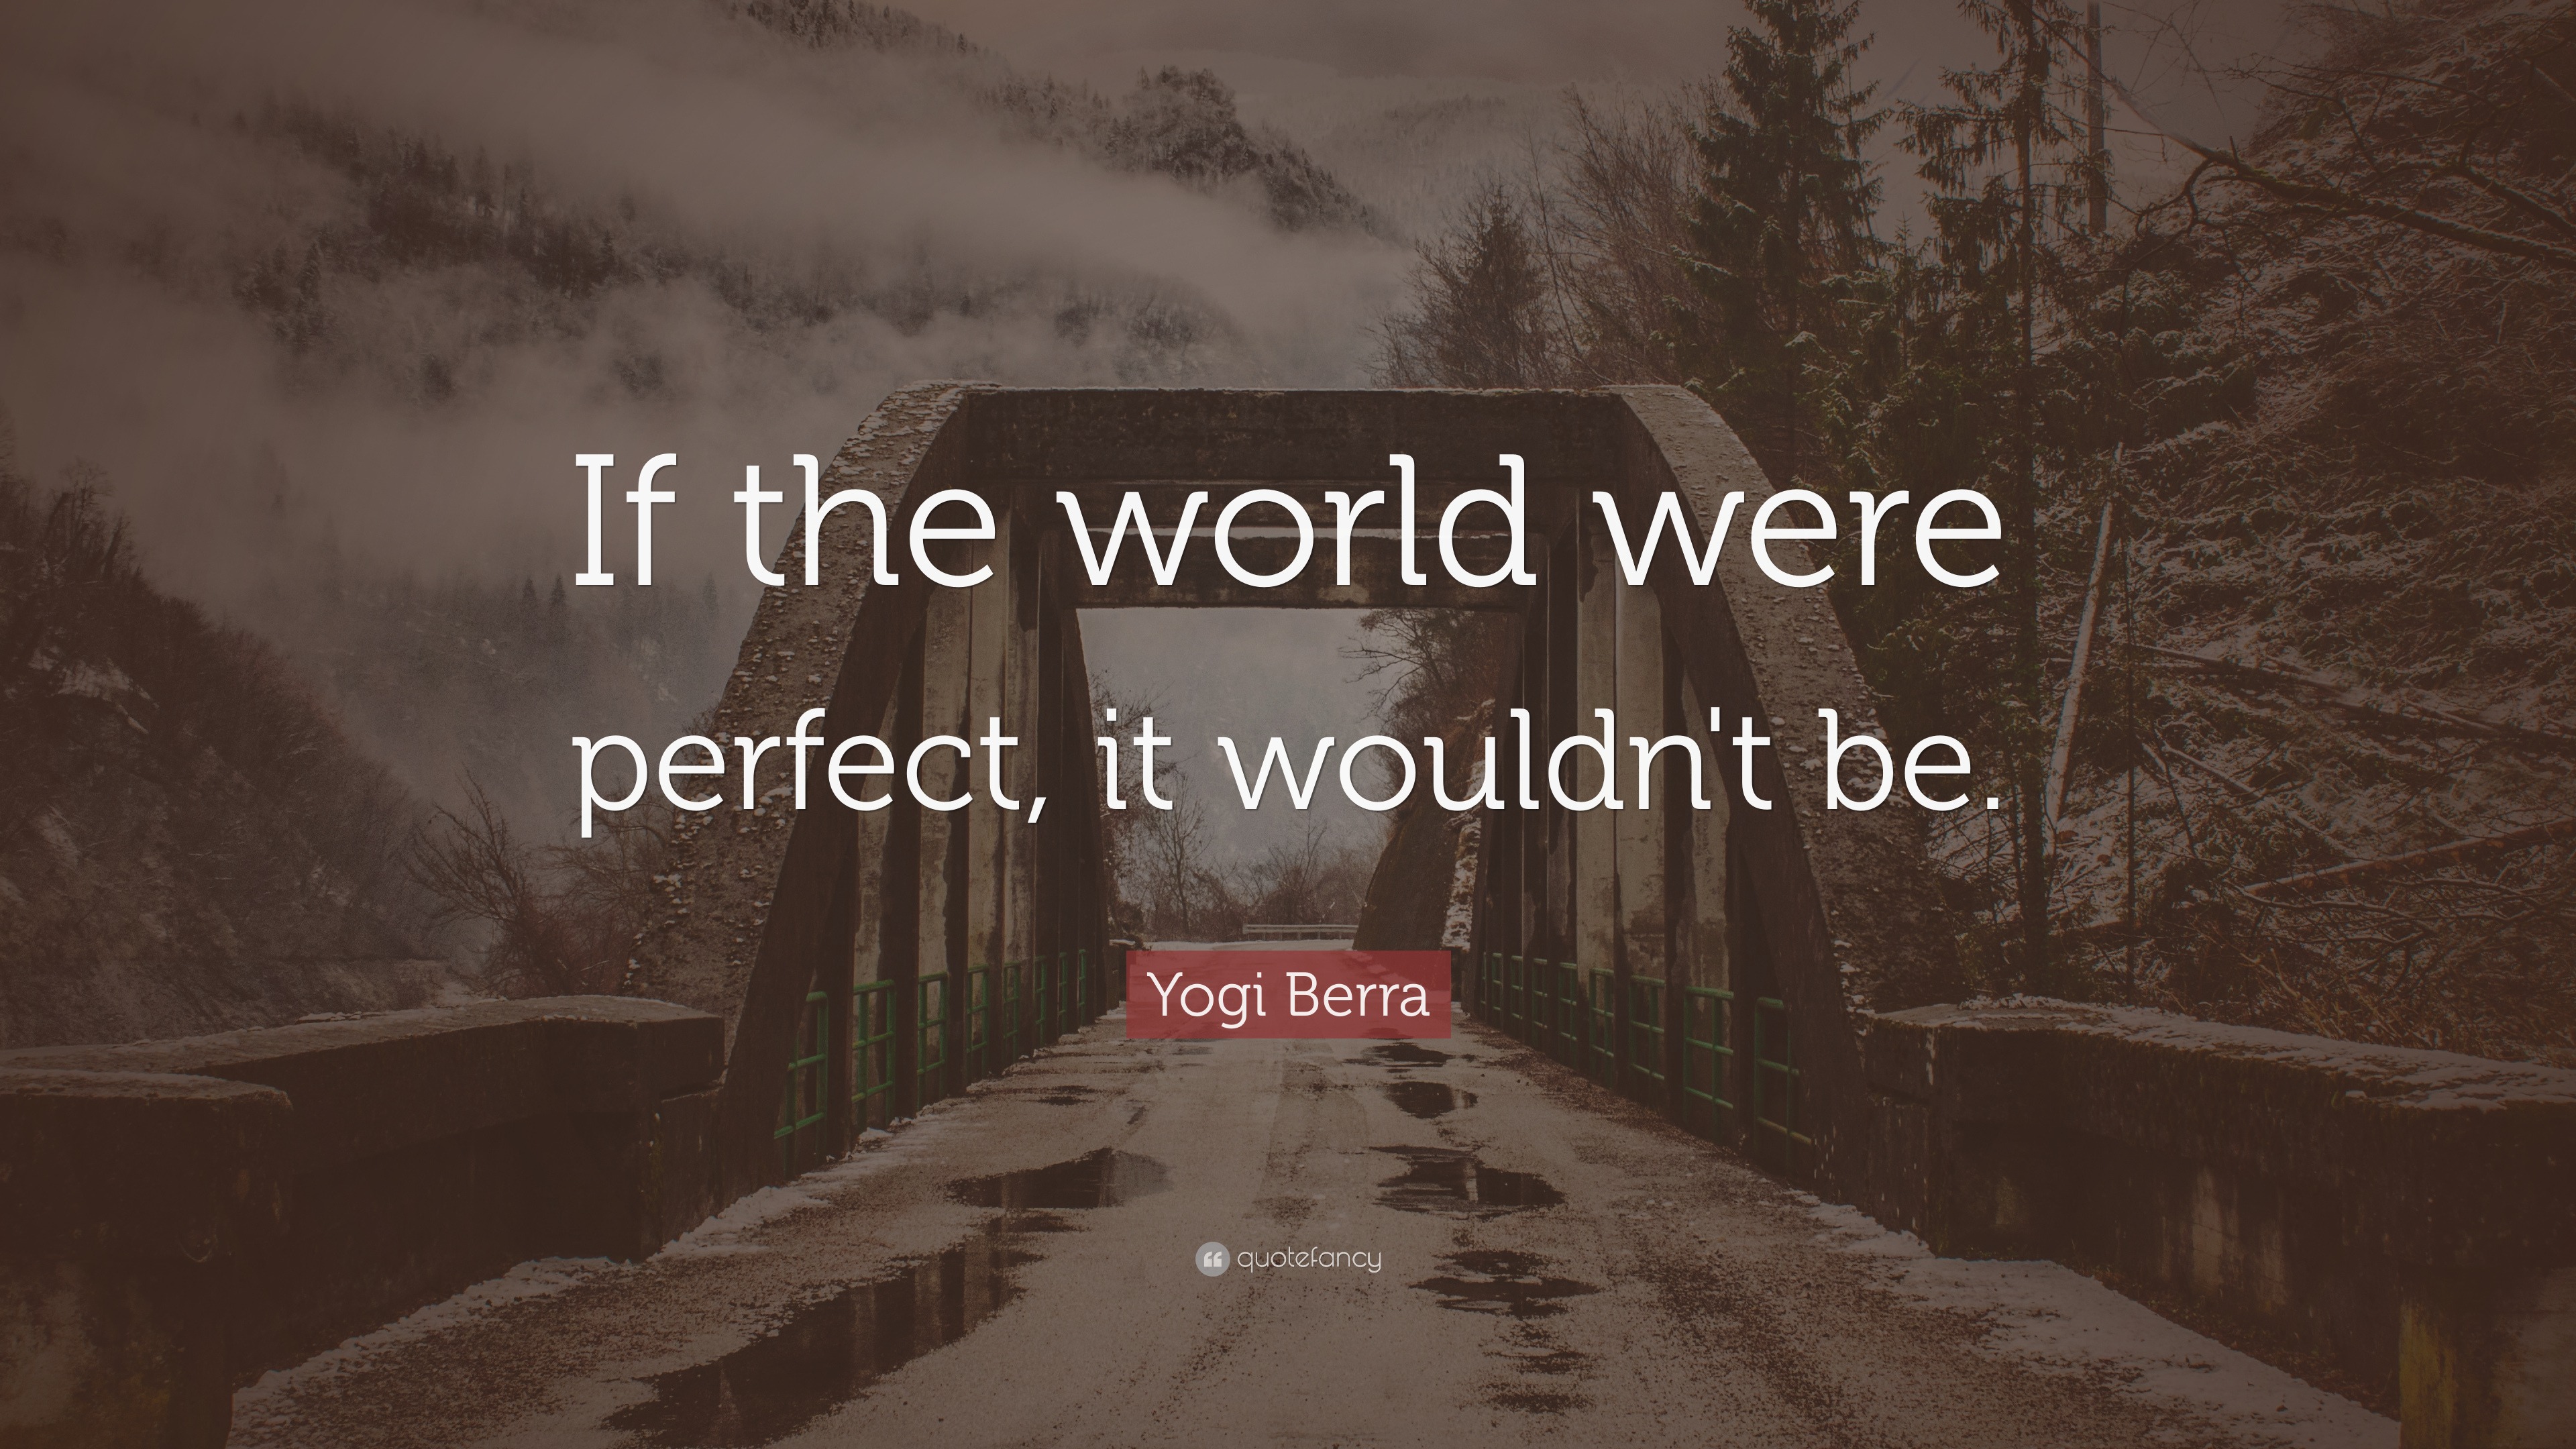 If the world were perfect, it wouldn't be: Journal notebook with 50  humorous quotes from Yogi Berra